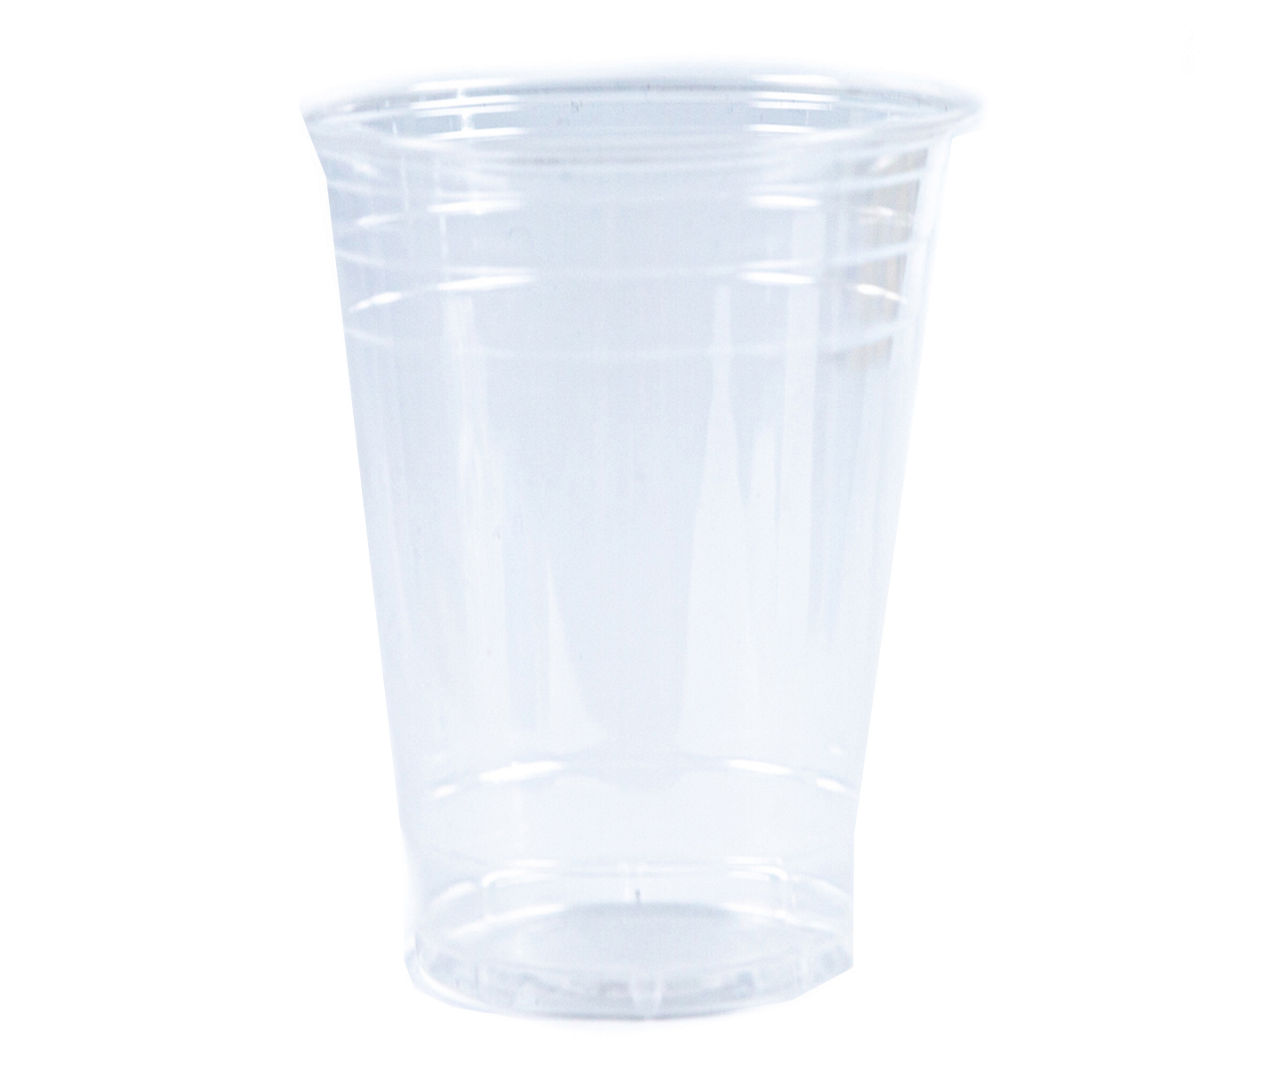 White 16 oz Plastic Cups for 50 Guests